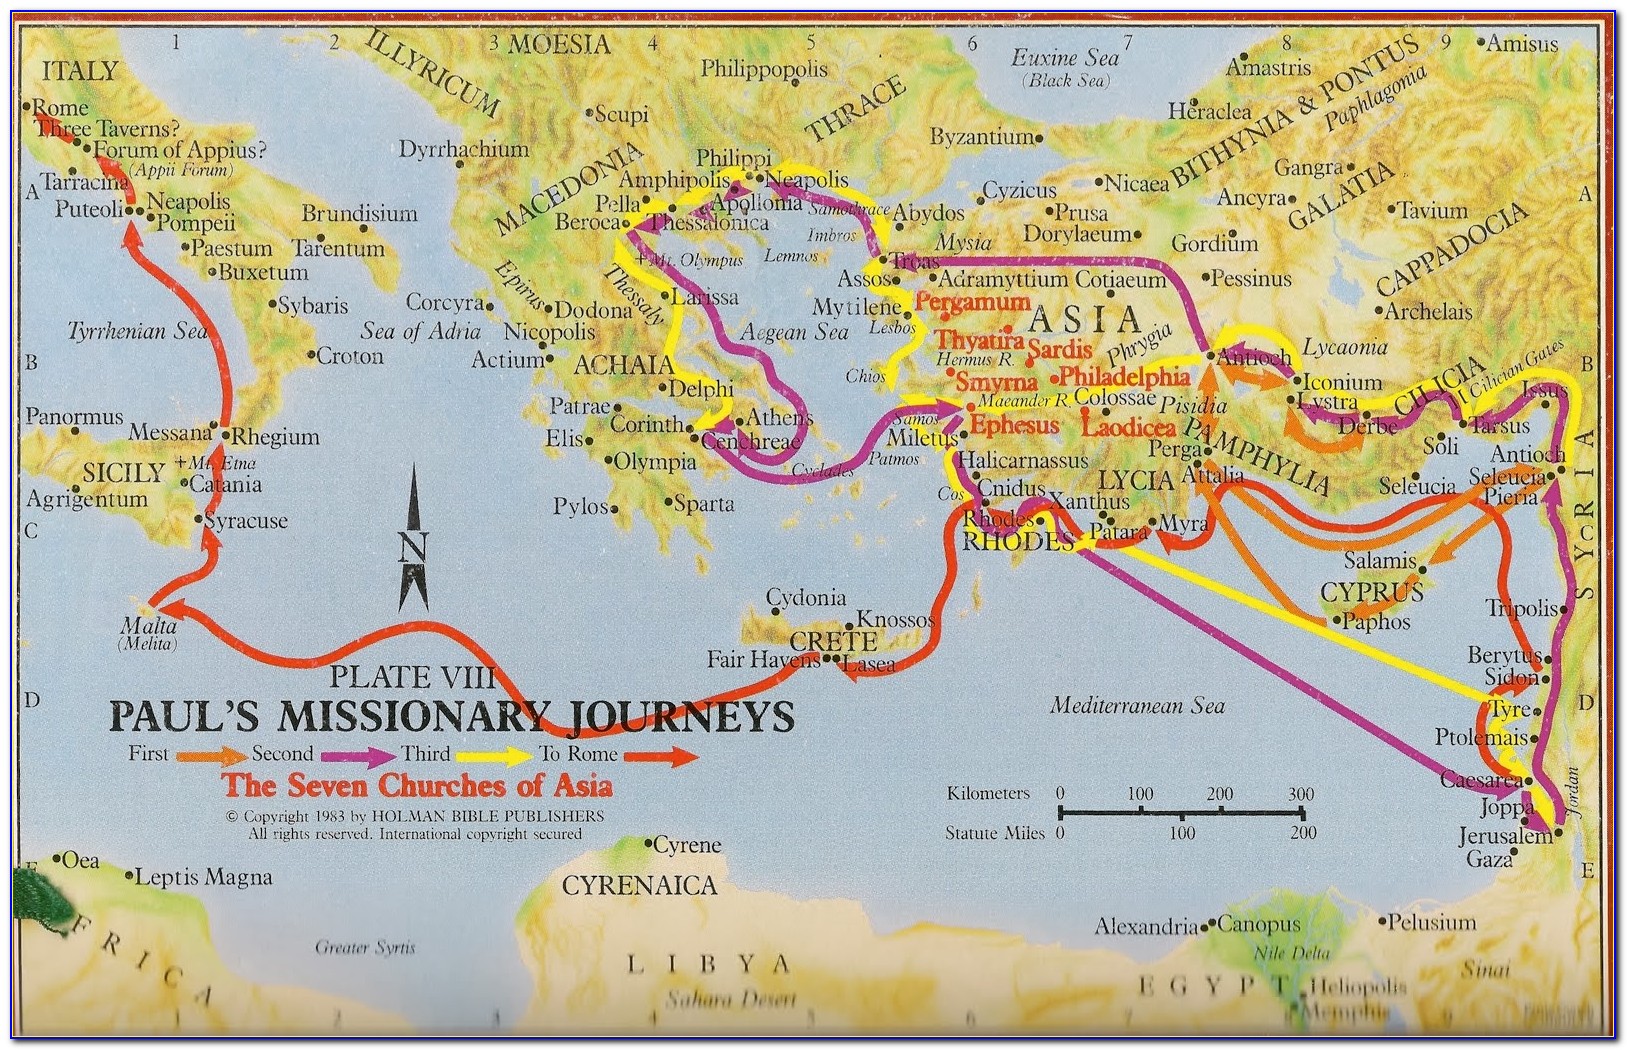 Paul's Second Missionary Journey Map